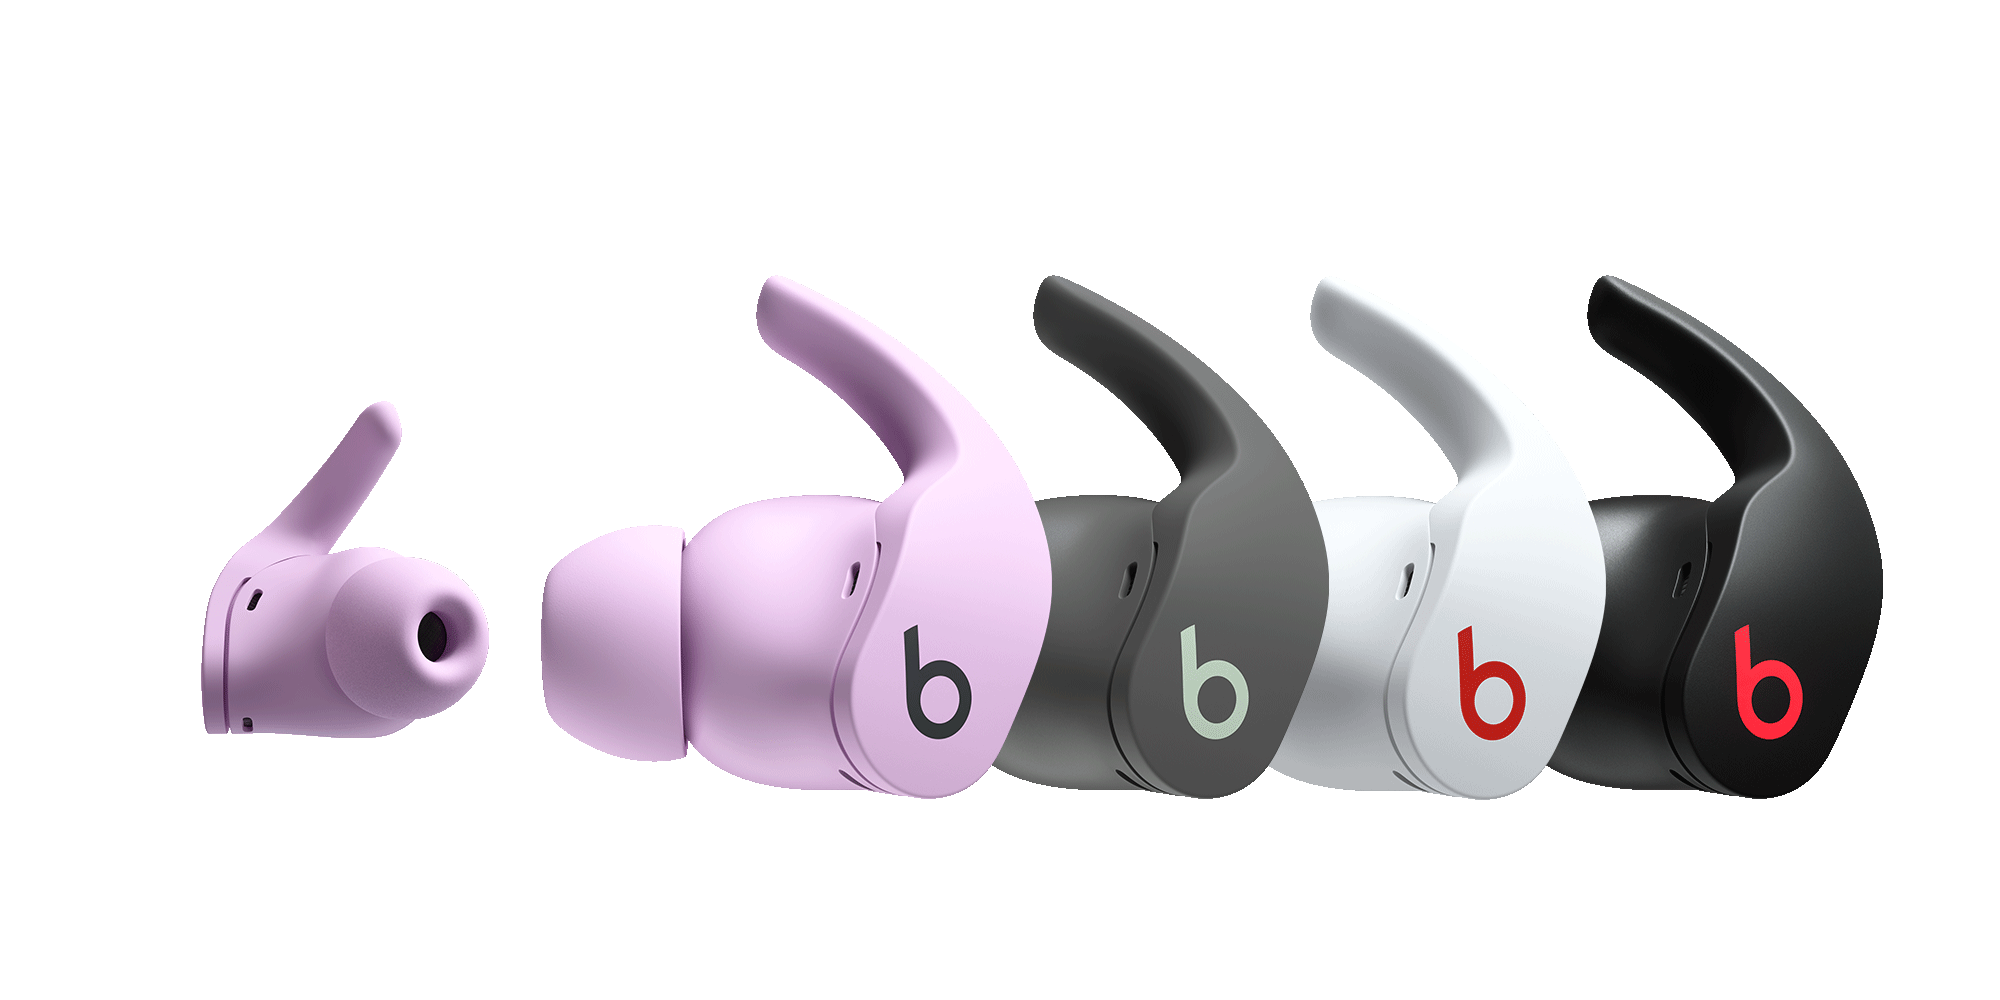 Beats Just Released Their Best Fitness Earphones Yet, But You Don’t Have To Work Out To Appreciate Them